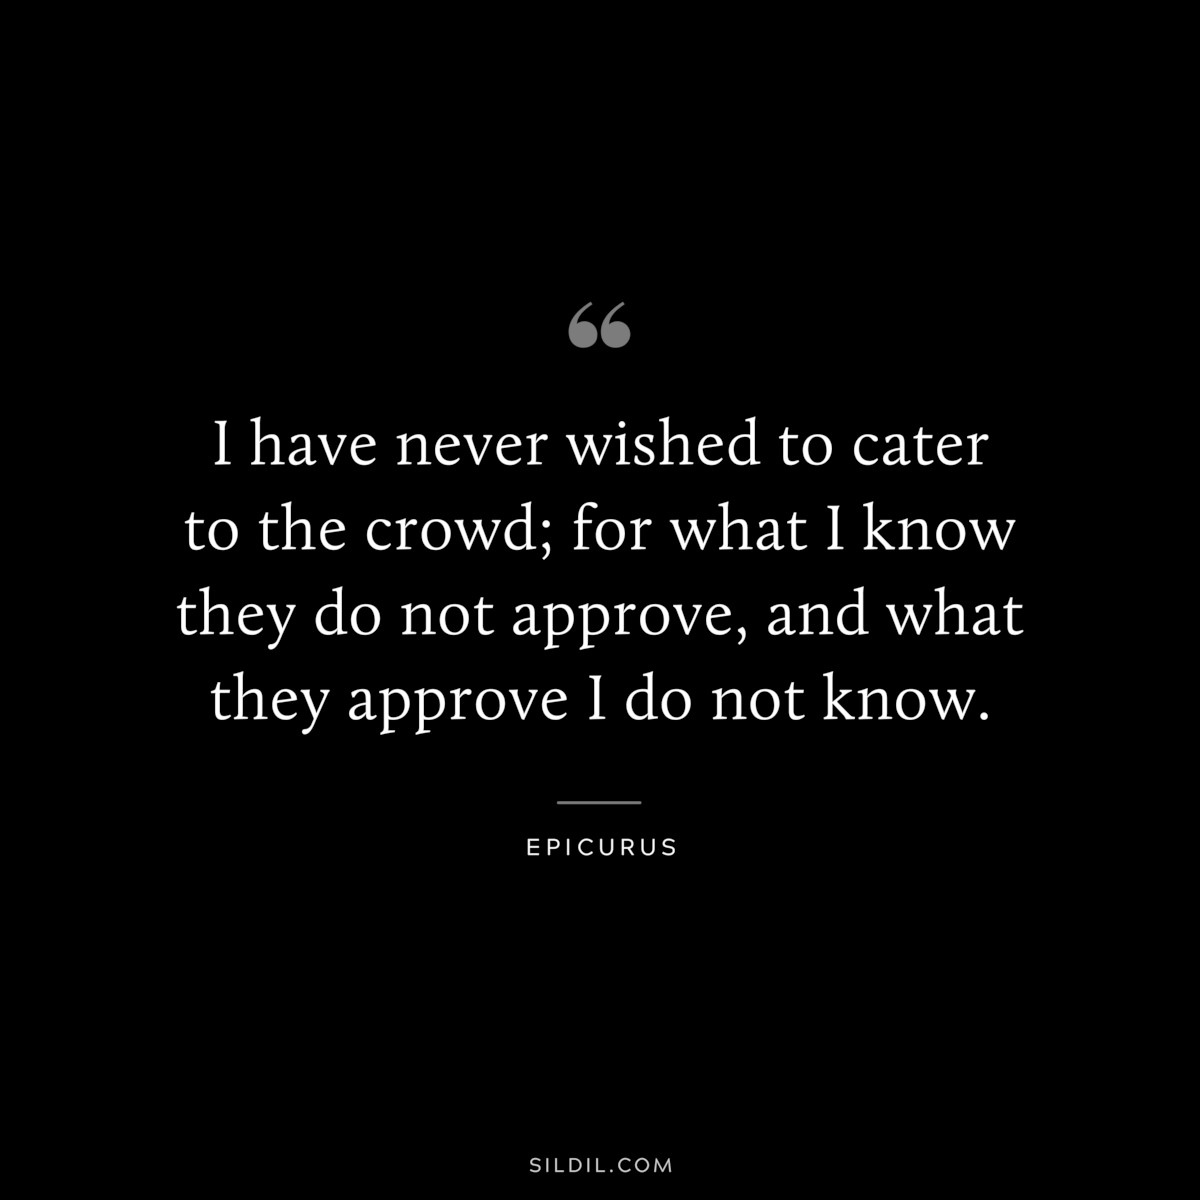 I have never wished to cater to the crowd; for what I know they do not approve, and what they approve I do not know. — Epicurus